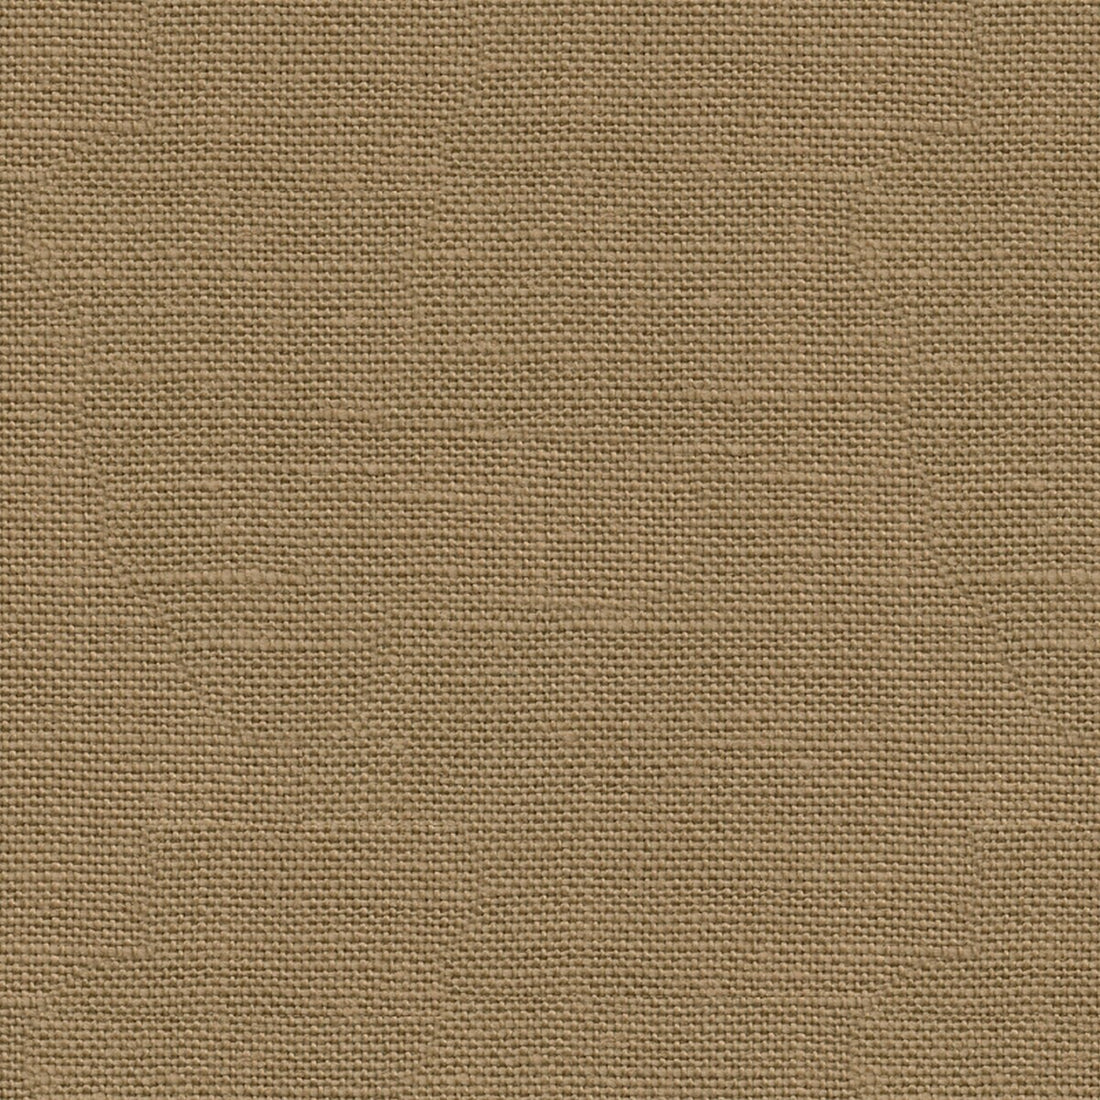 Lea fabric in camel color - pattern J0337.170.0 - by G P &amp; J Baker in the Crayford collection